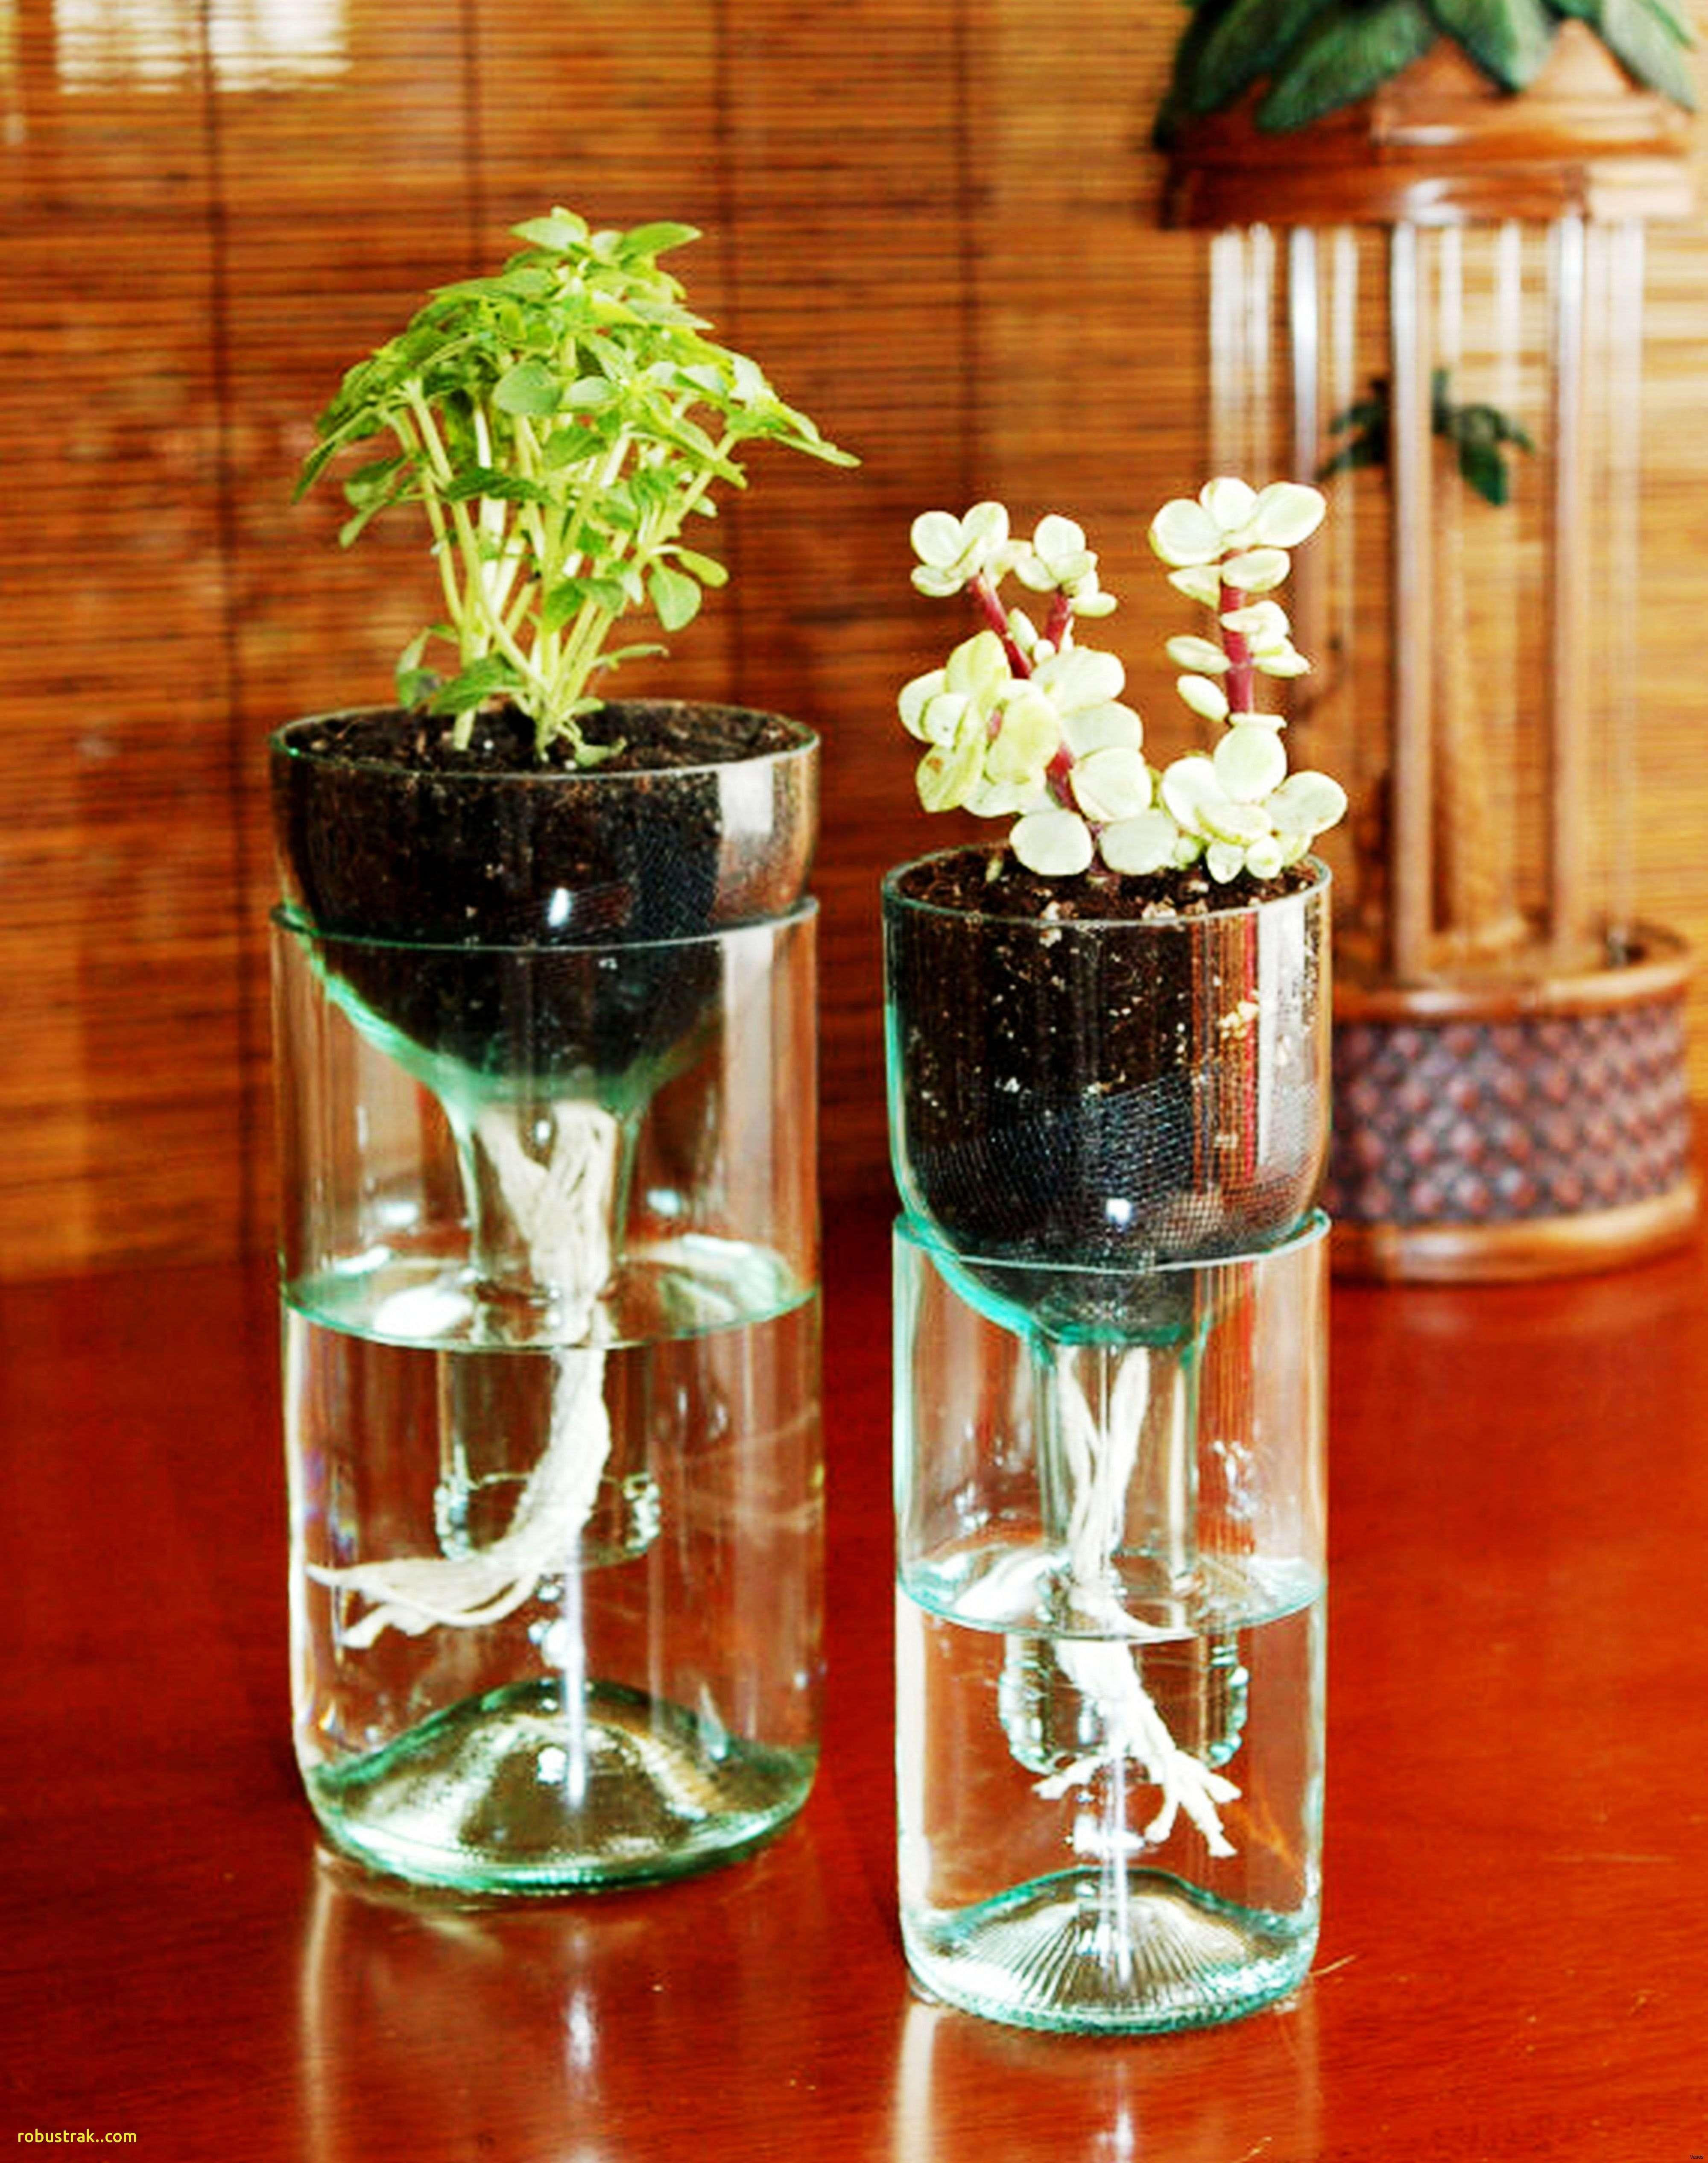 Cheap Rectangular Glass Vases Of Diy Centerpiece Ideas Luxury Best 15 Cheap and Easy Diy Vase Filler Regarding Cheap and Easy Diy Vase Diy Centerpiece Ideas Unique 43 Inspirational Decoration Ideas for Christmas Graphics